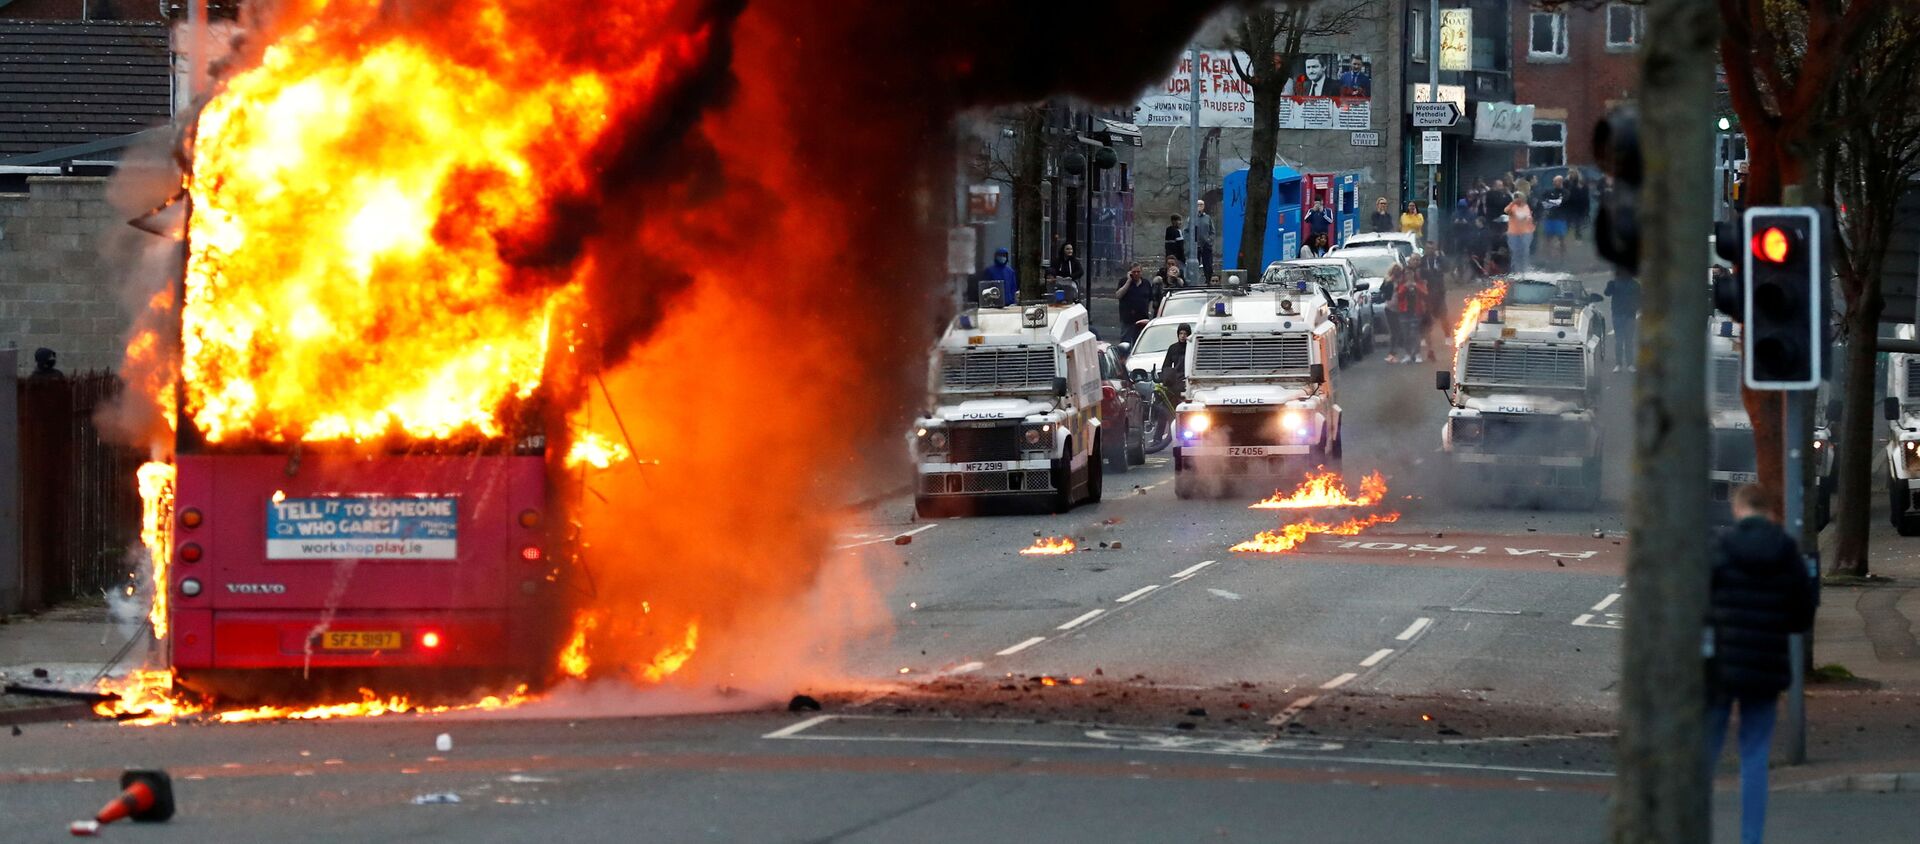 Police vehicles are seen behind a hijacked bus burns on the Shankill Road as protests continue in Belfast, Northern Ireland, 7 April 2021 - Sputnik International, 1920, 09.04.2021